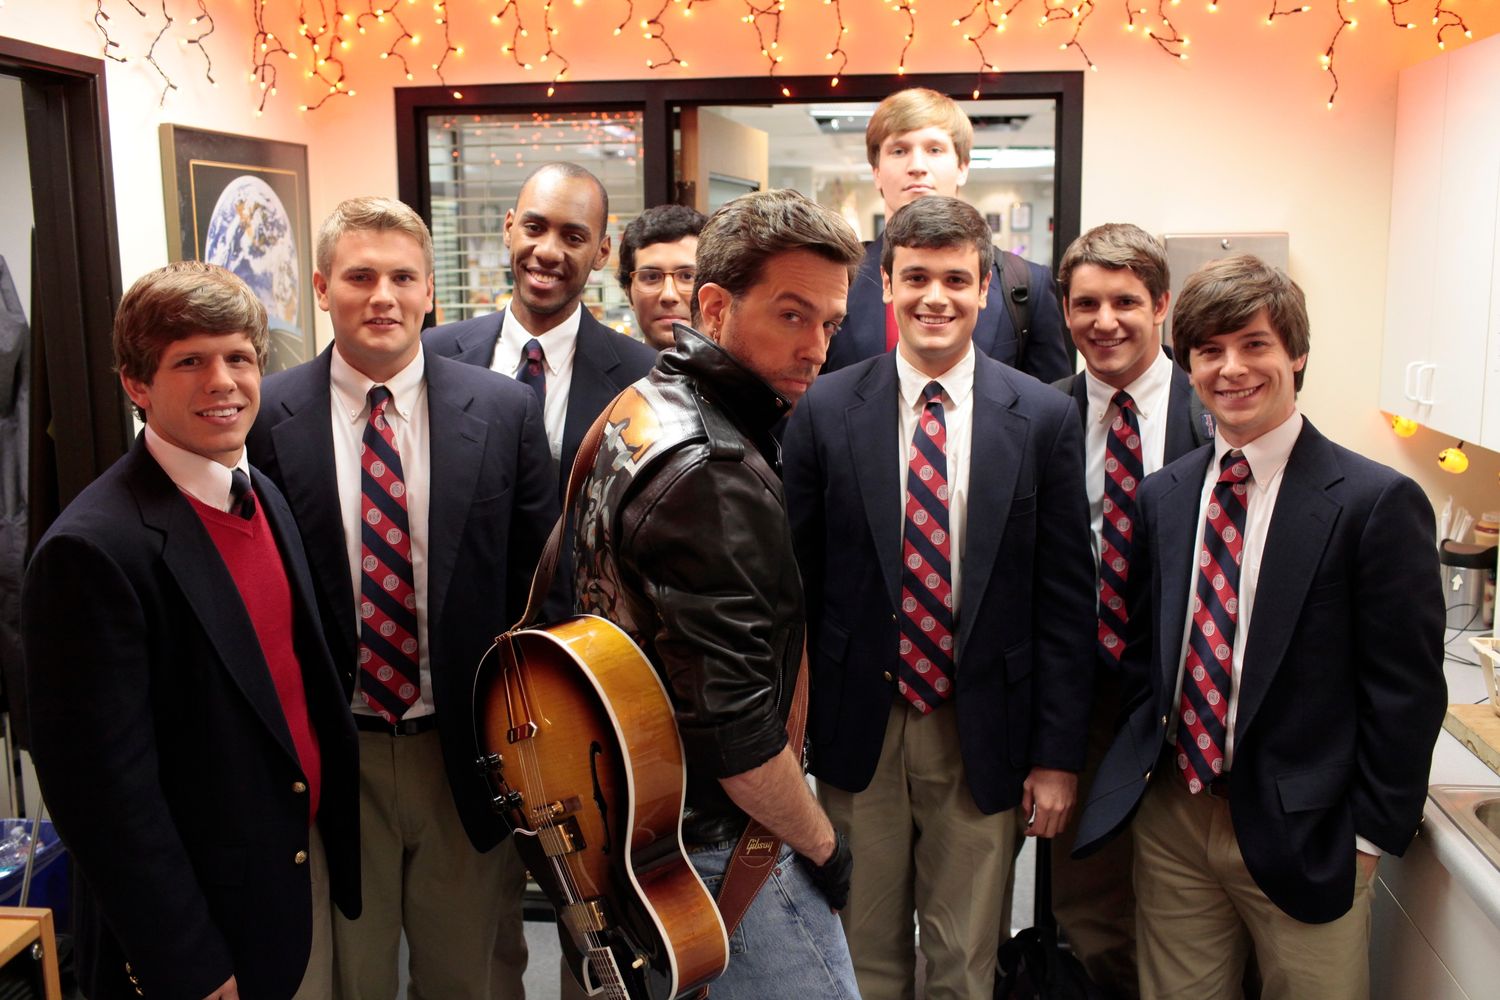 What Was Andy’s Acapella Group In The Office